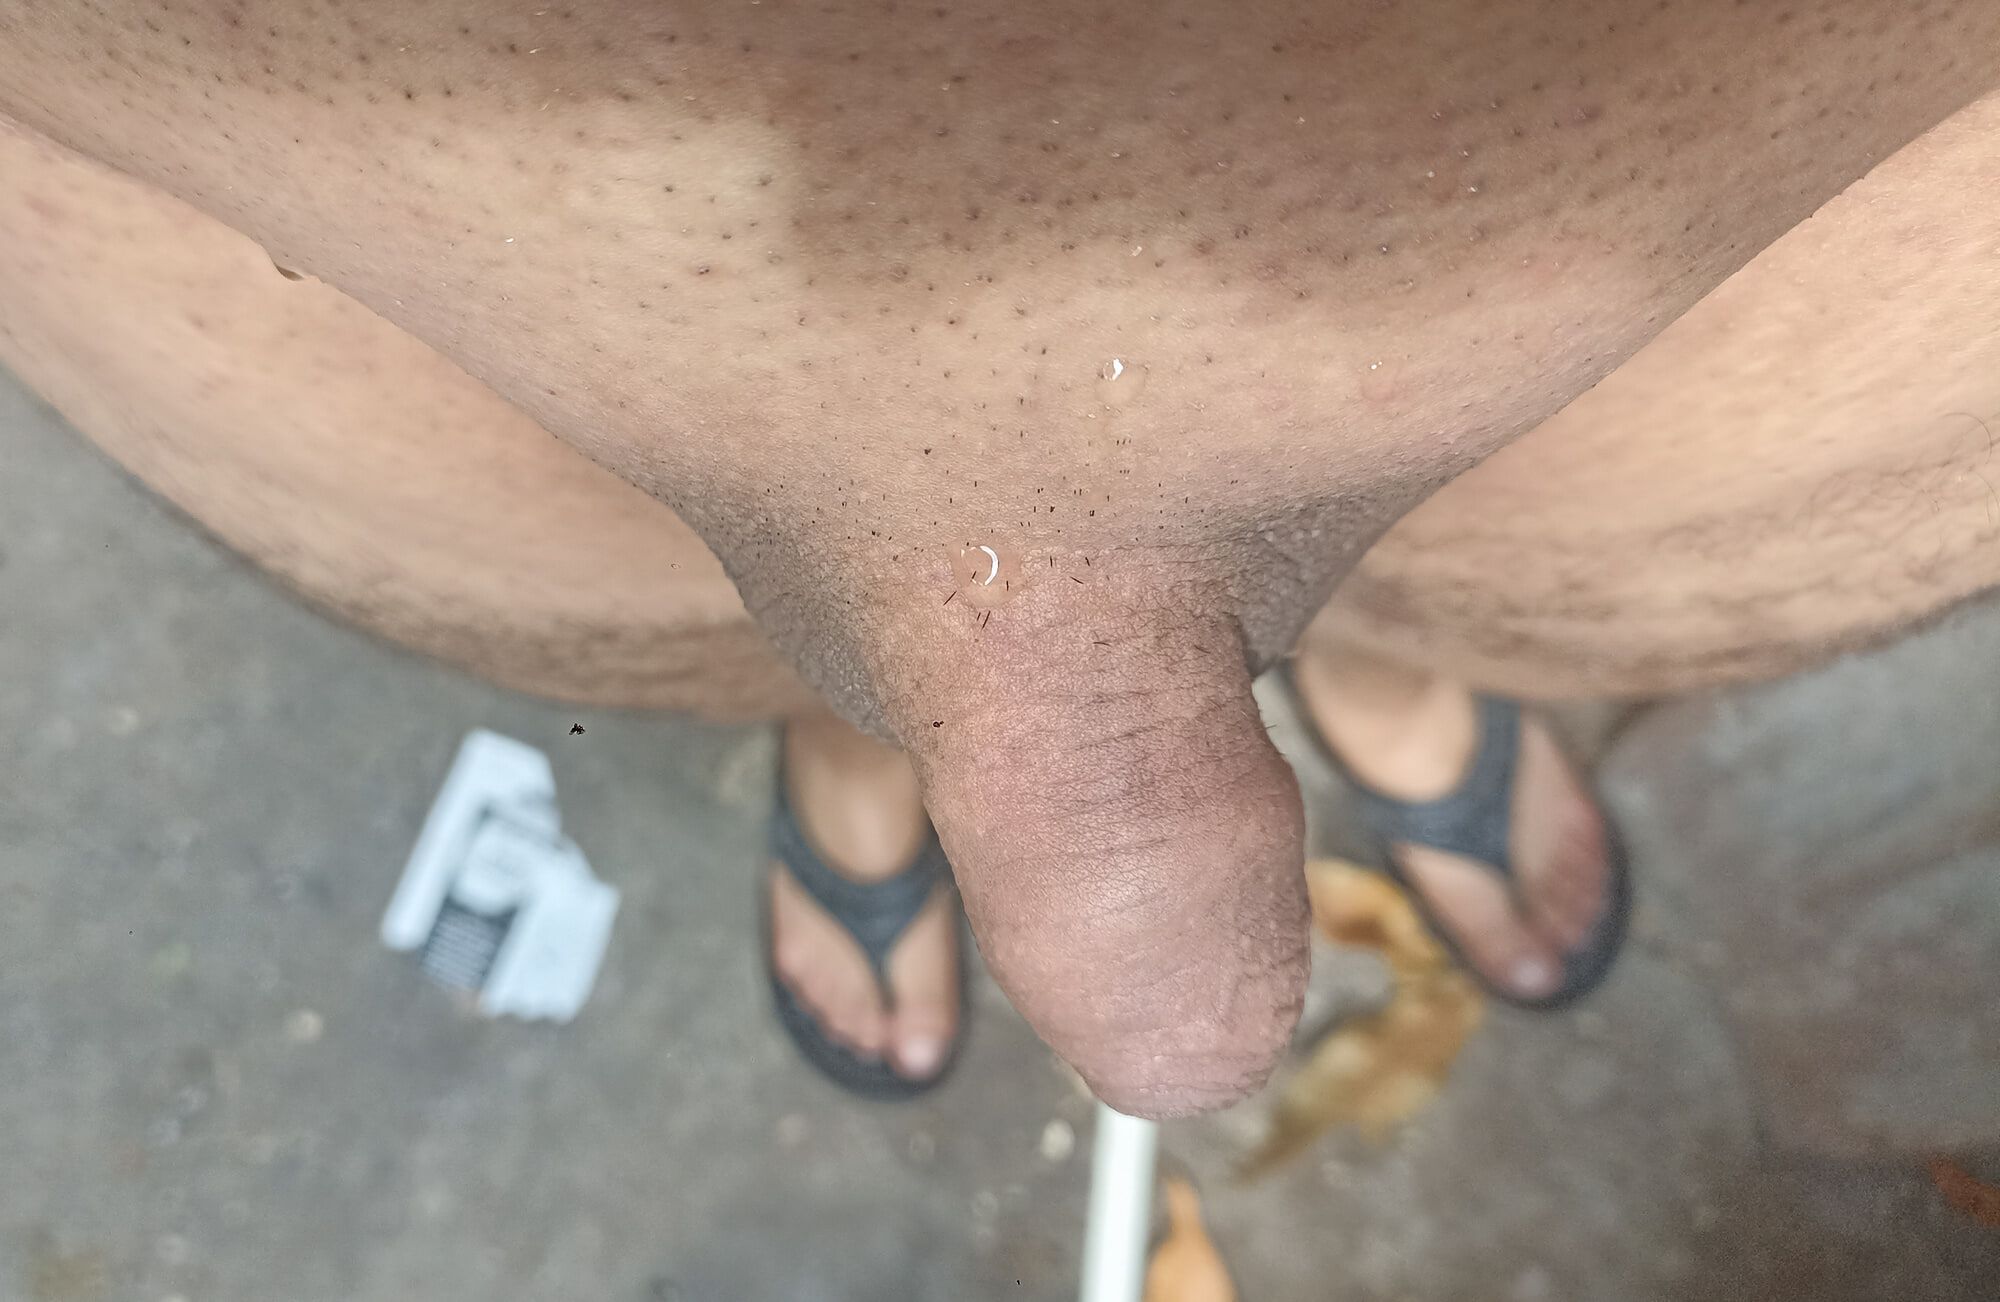 My little Flaccid Penis (without Erection) - Compilation 1 #13